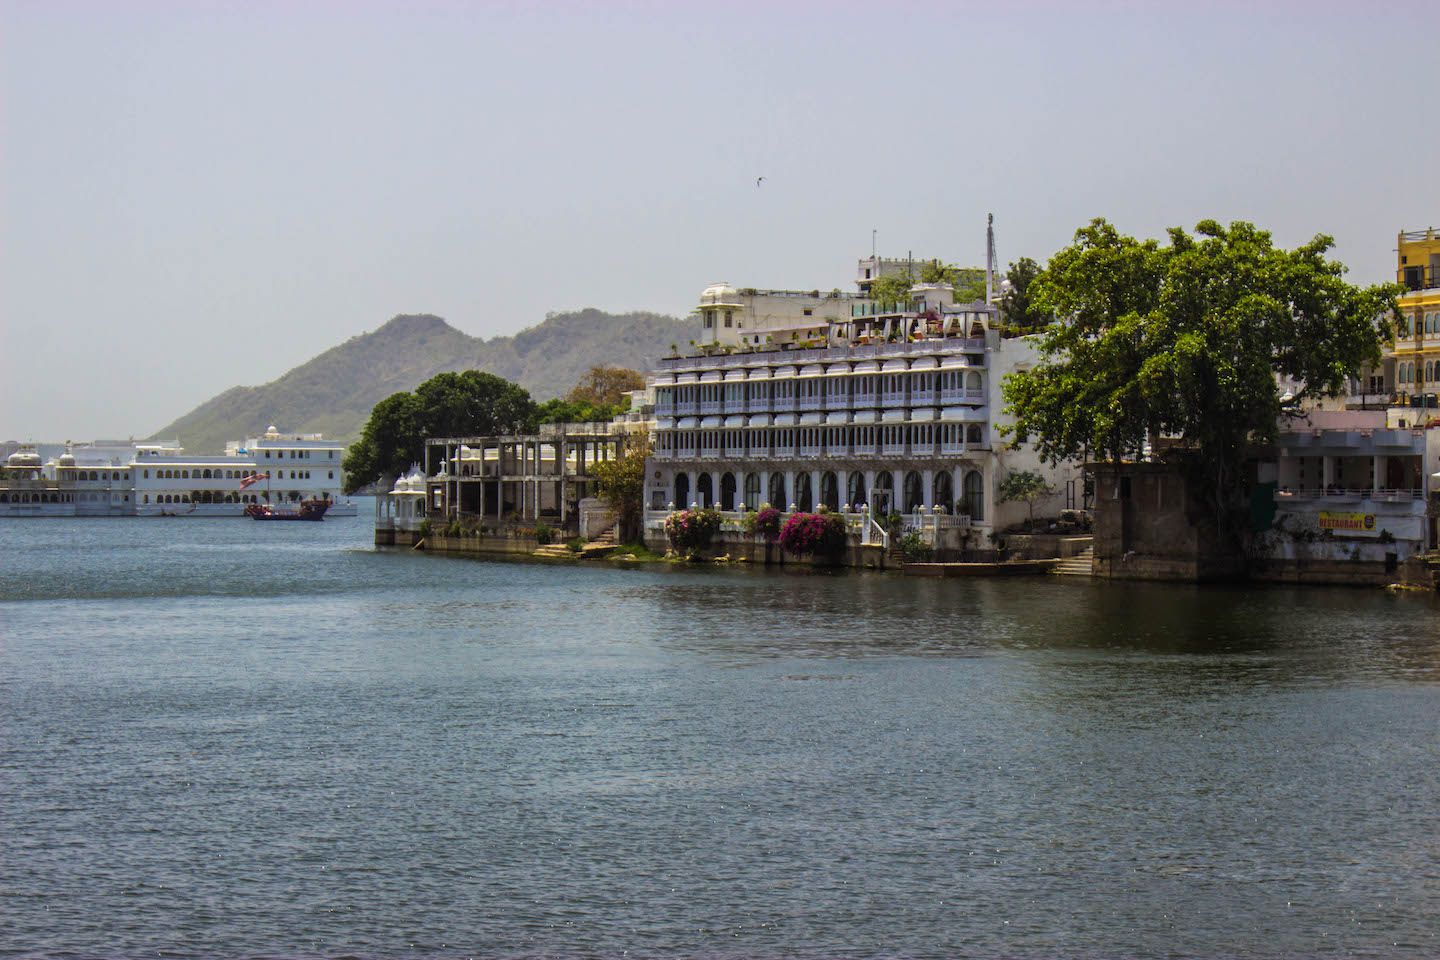 View of Pichola Lake in Udaipur, India